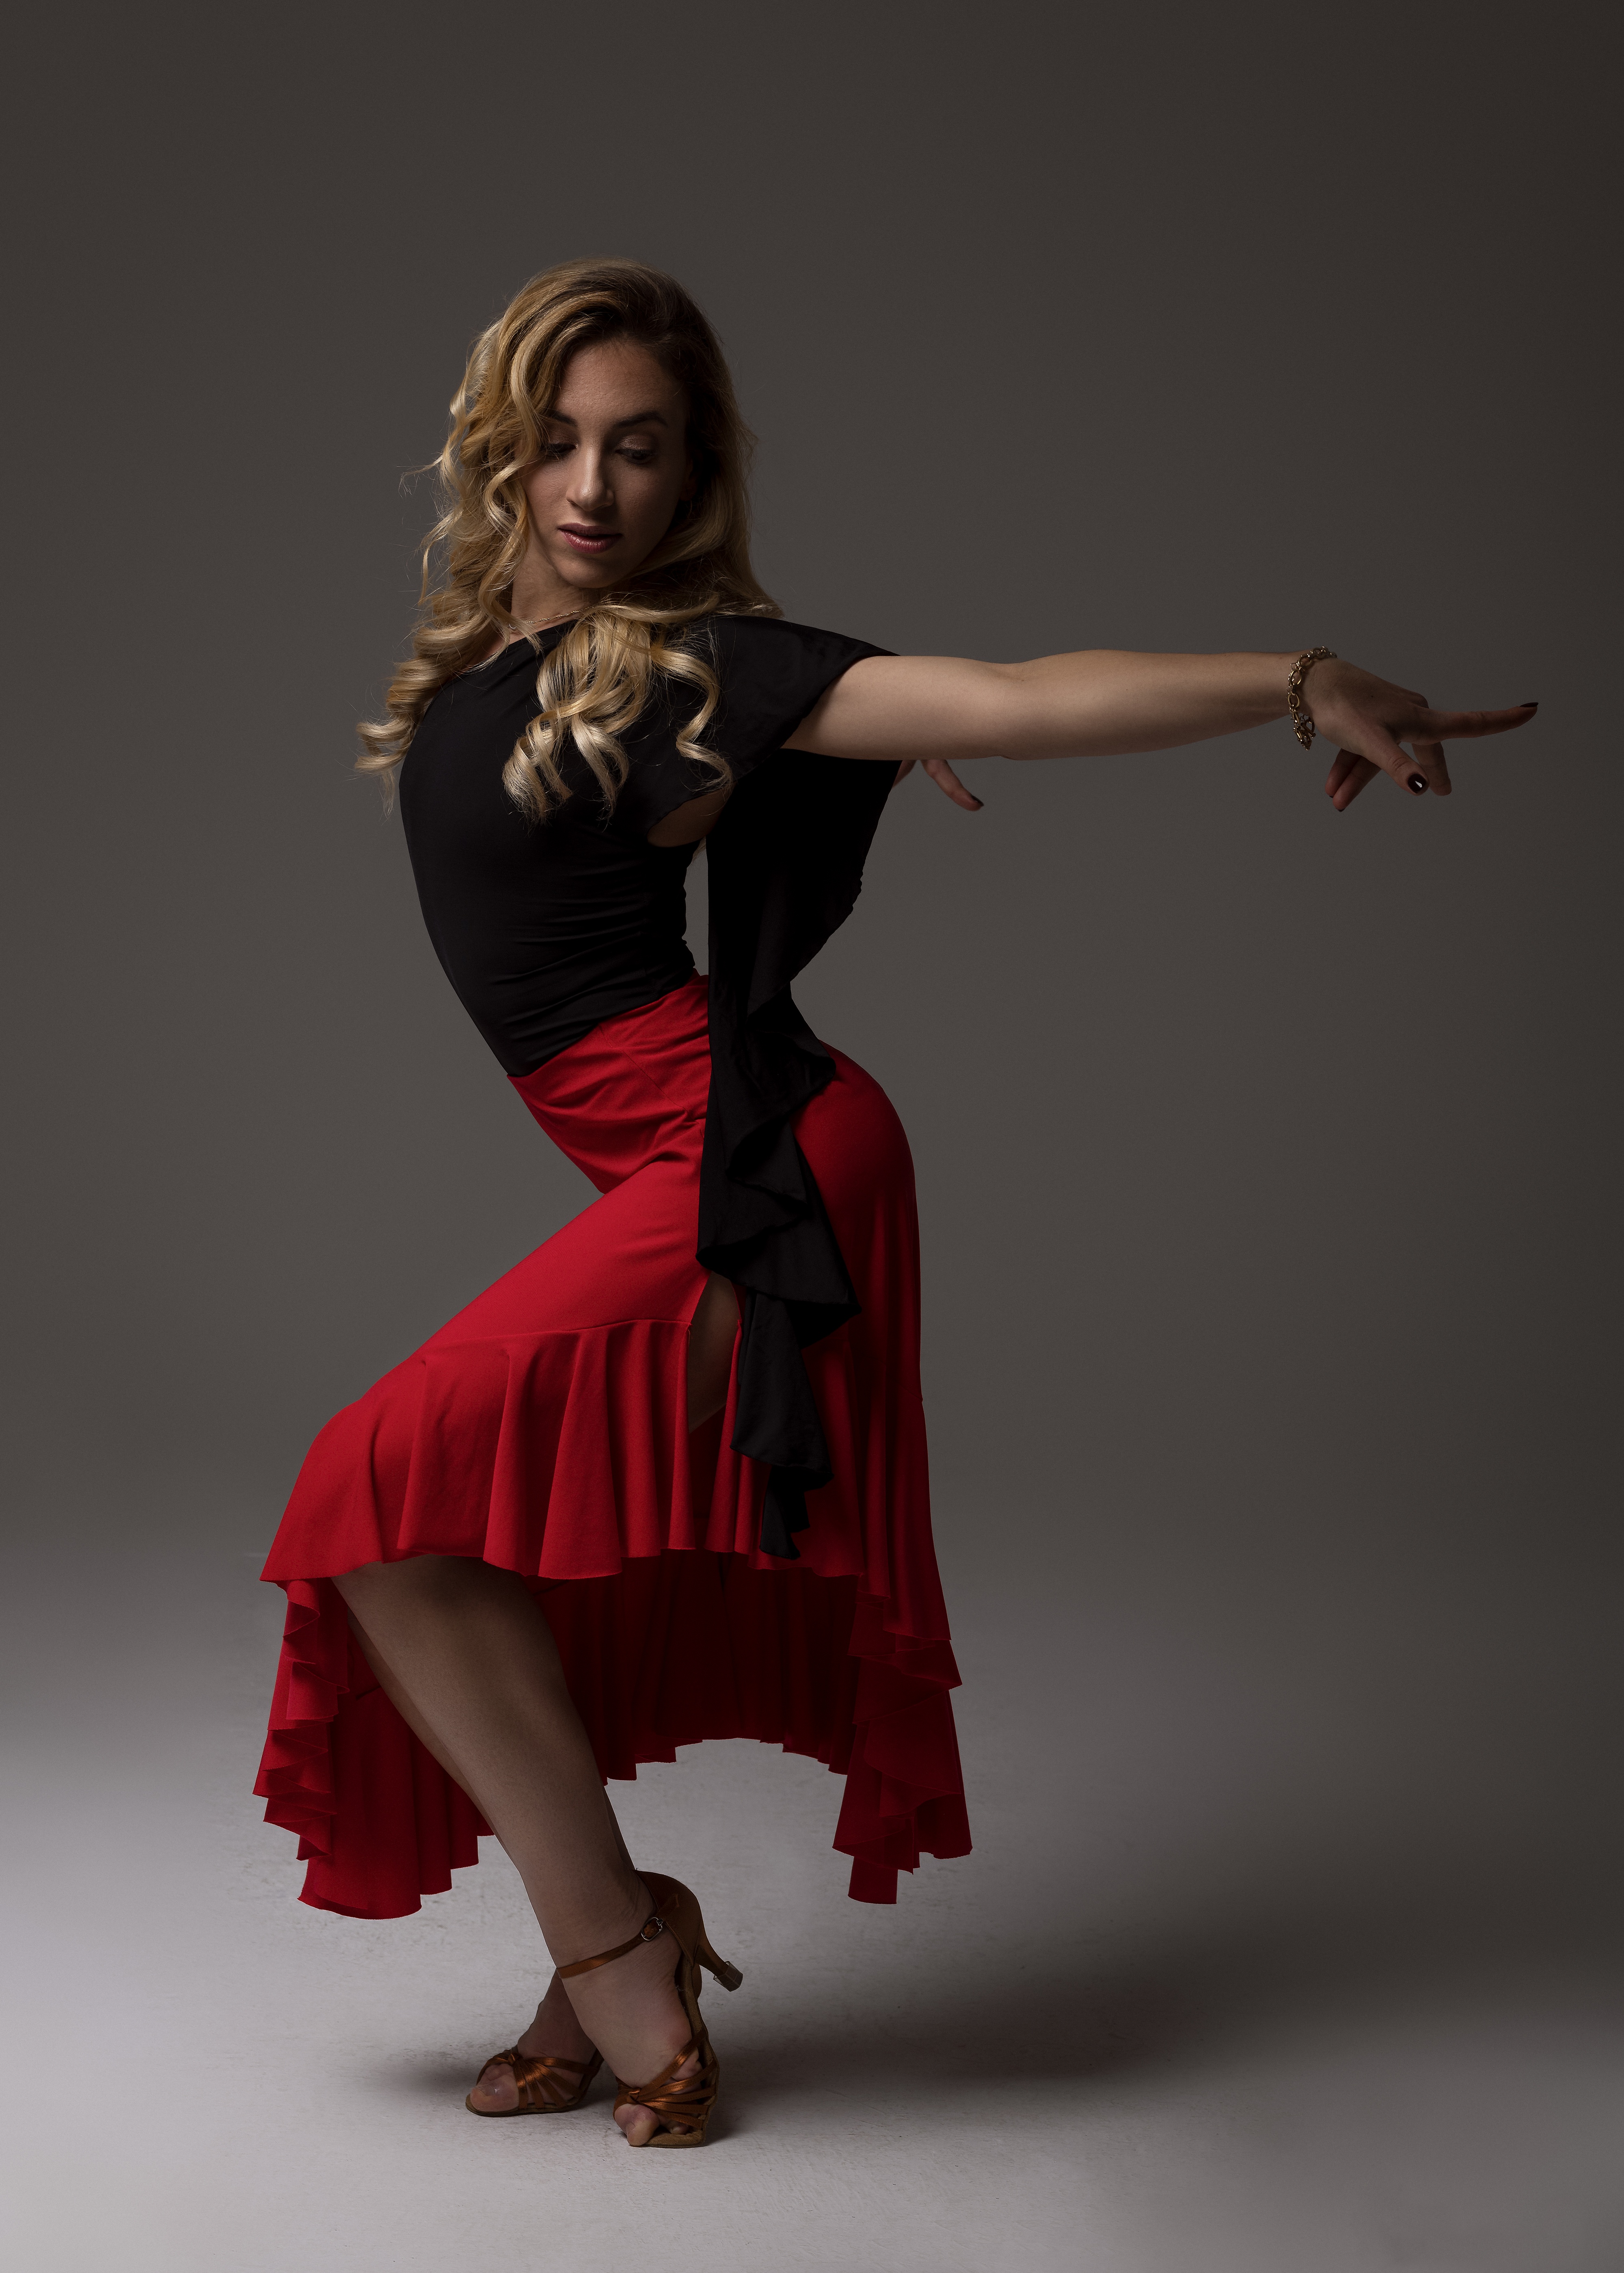 Zoomed woman hands pose in spanish flamenco dance - Stock Image - Everypixel